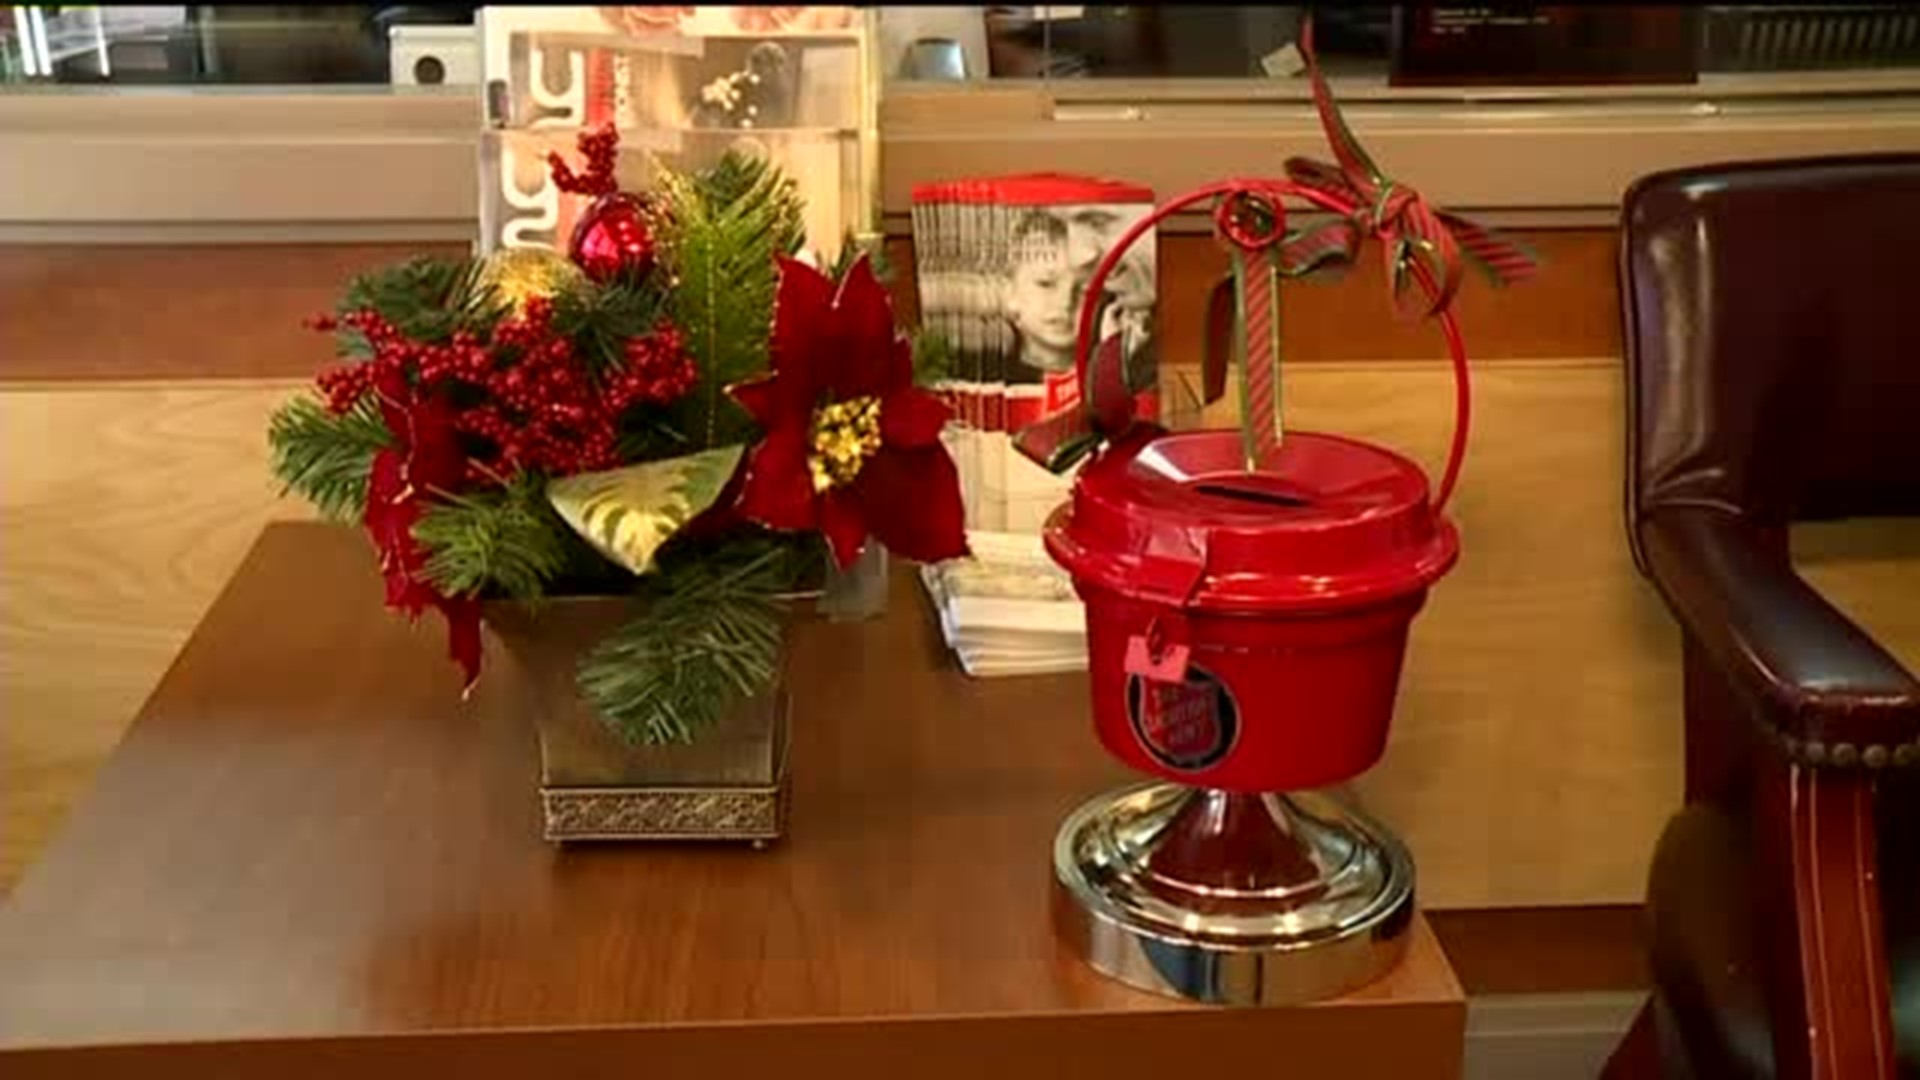 Small Kettles Helping Salvation Army in East Stroudsburg